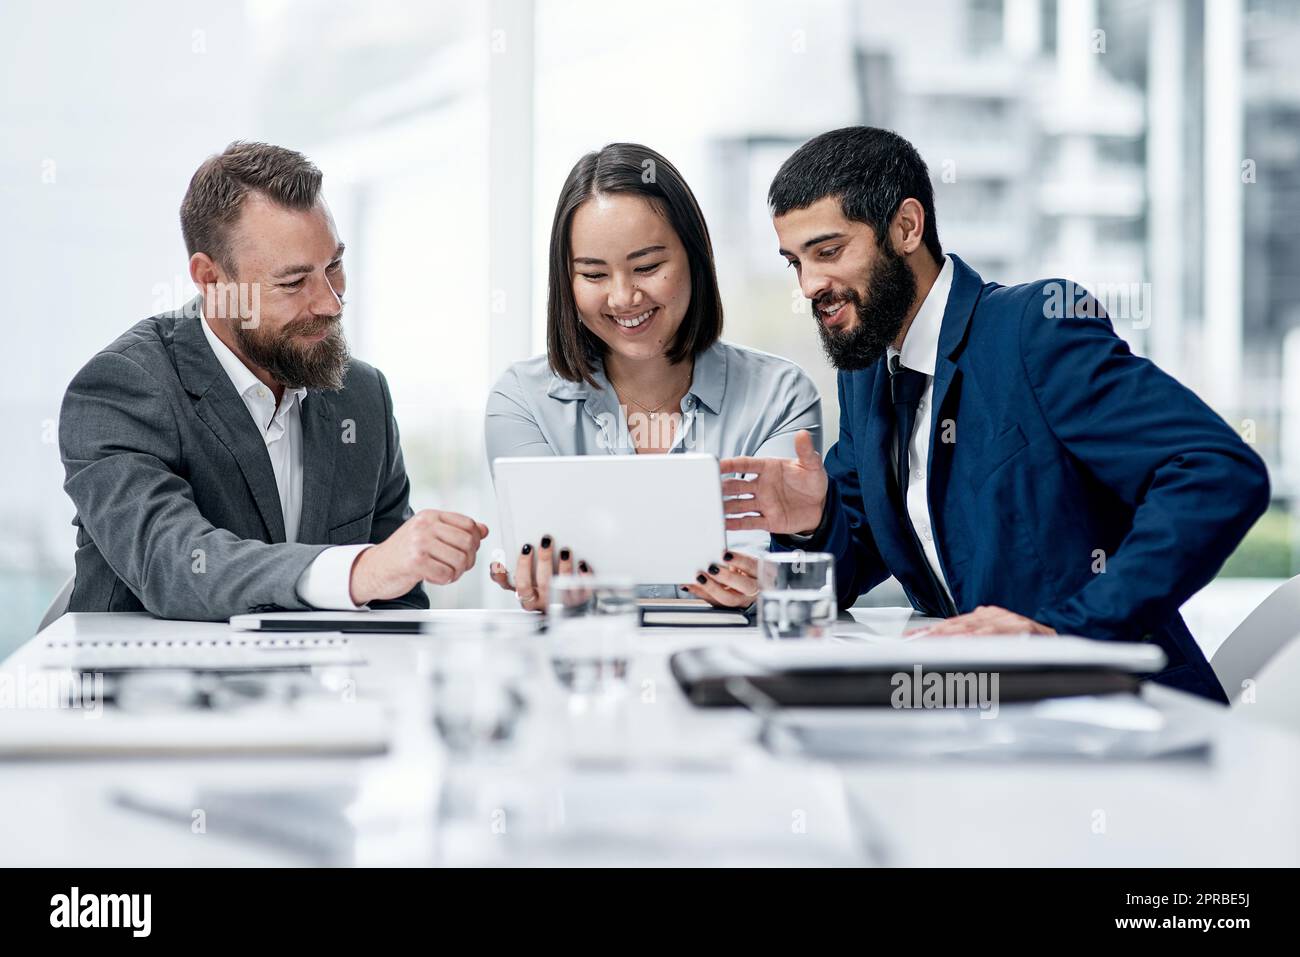 Digging deeper into a wider net of possibilities. a group of businesspeople working together on a digital tablet in an office. Stock Photo